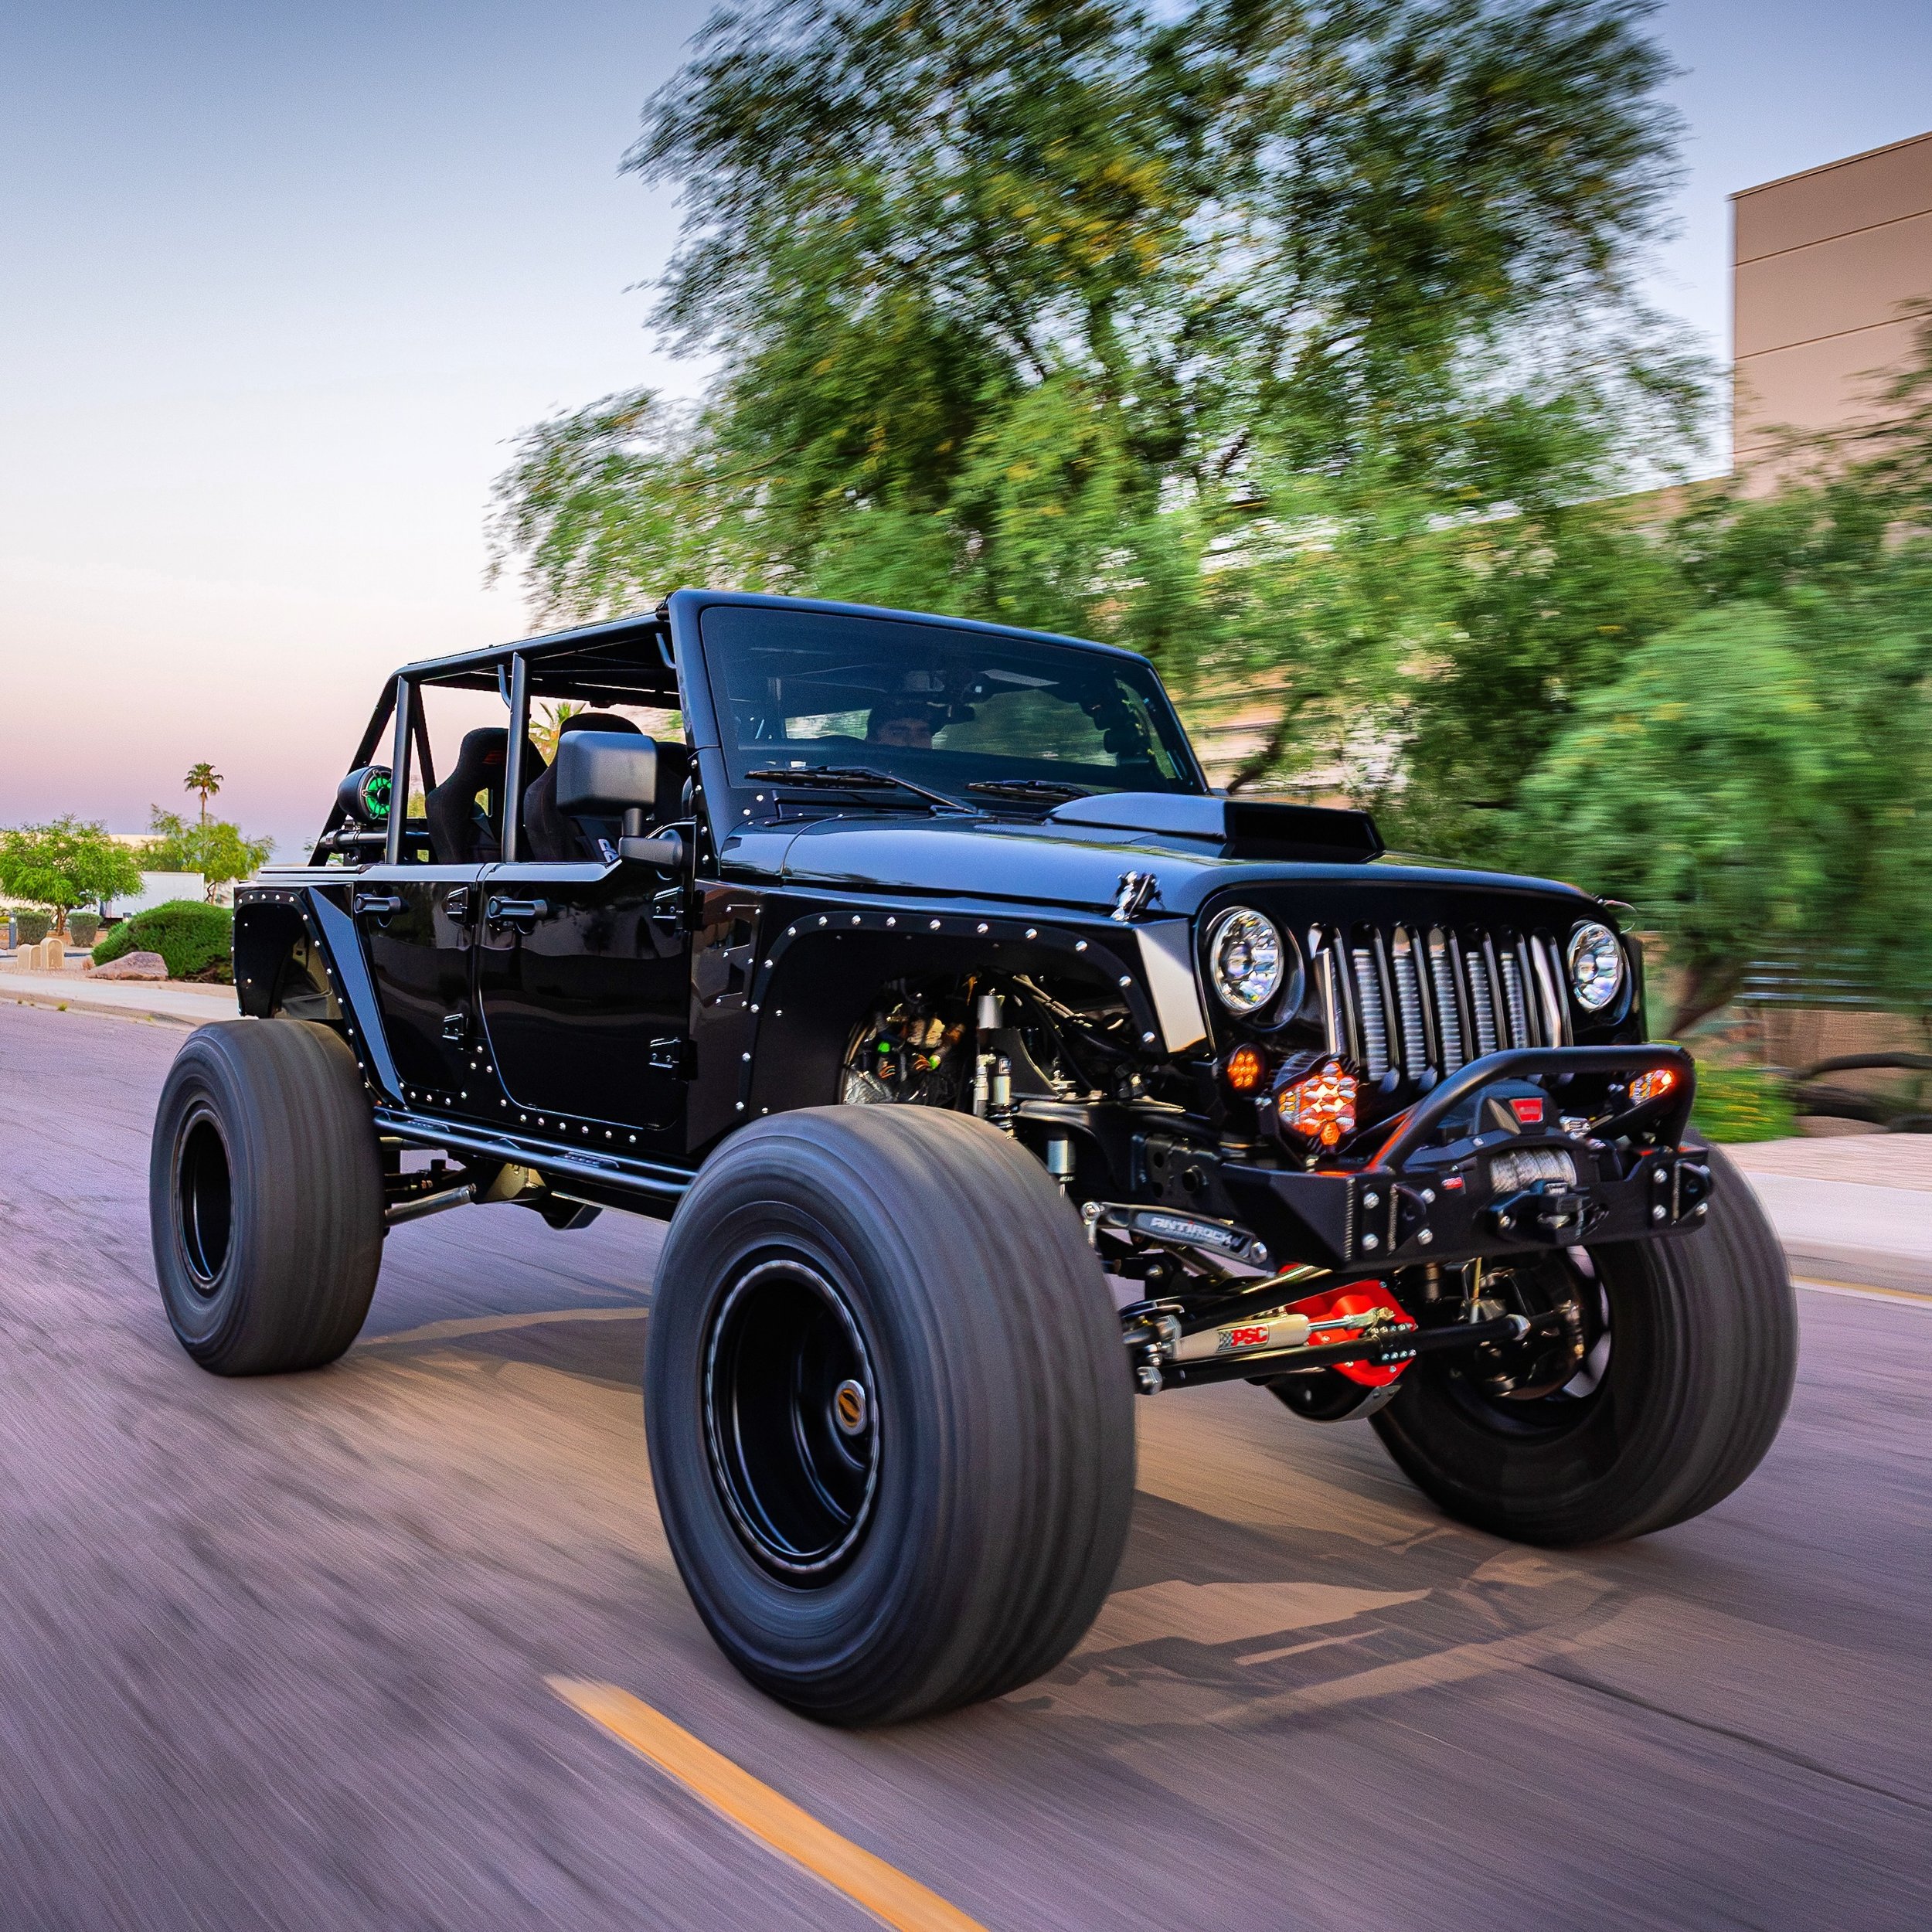 The final shots of @connormosack Jeep build came out killer.  This one will stand out anywhere it goes. #dentonracing #Jeep #LS7 #mastmotorsports #currieenterprises #rockjock4x4 #genrightoffroad #rondavisradiators #rpmextreme #maximumoffroadtransmiss